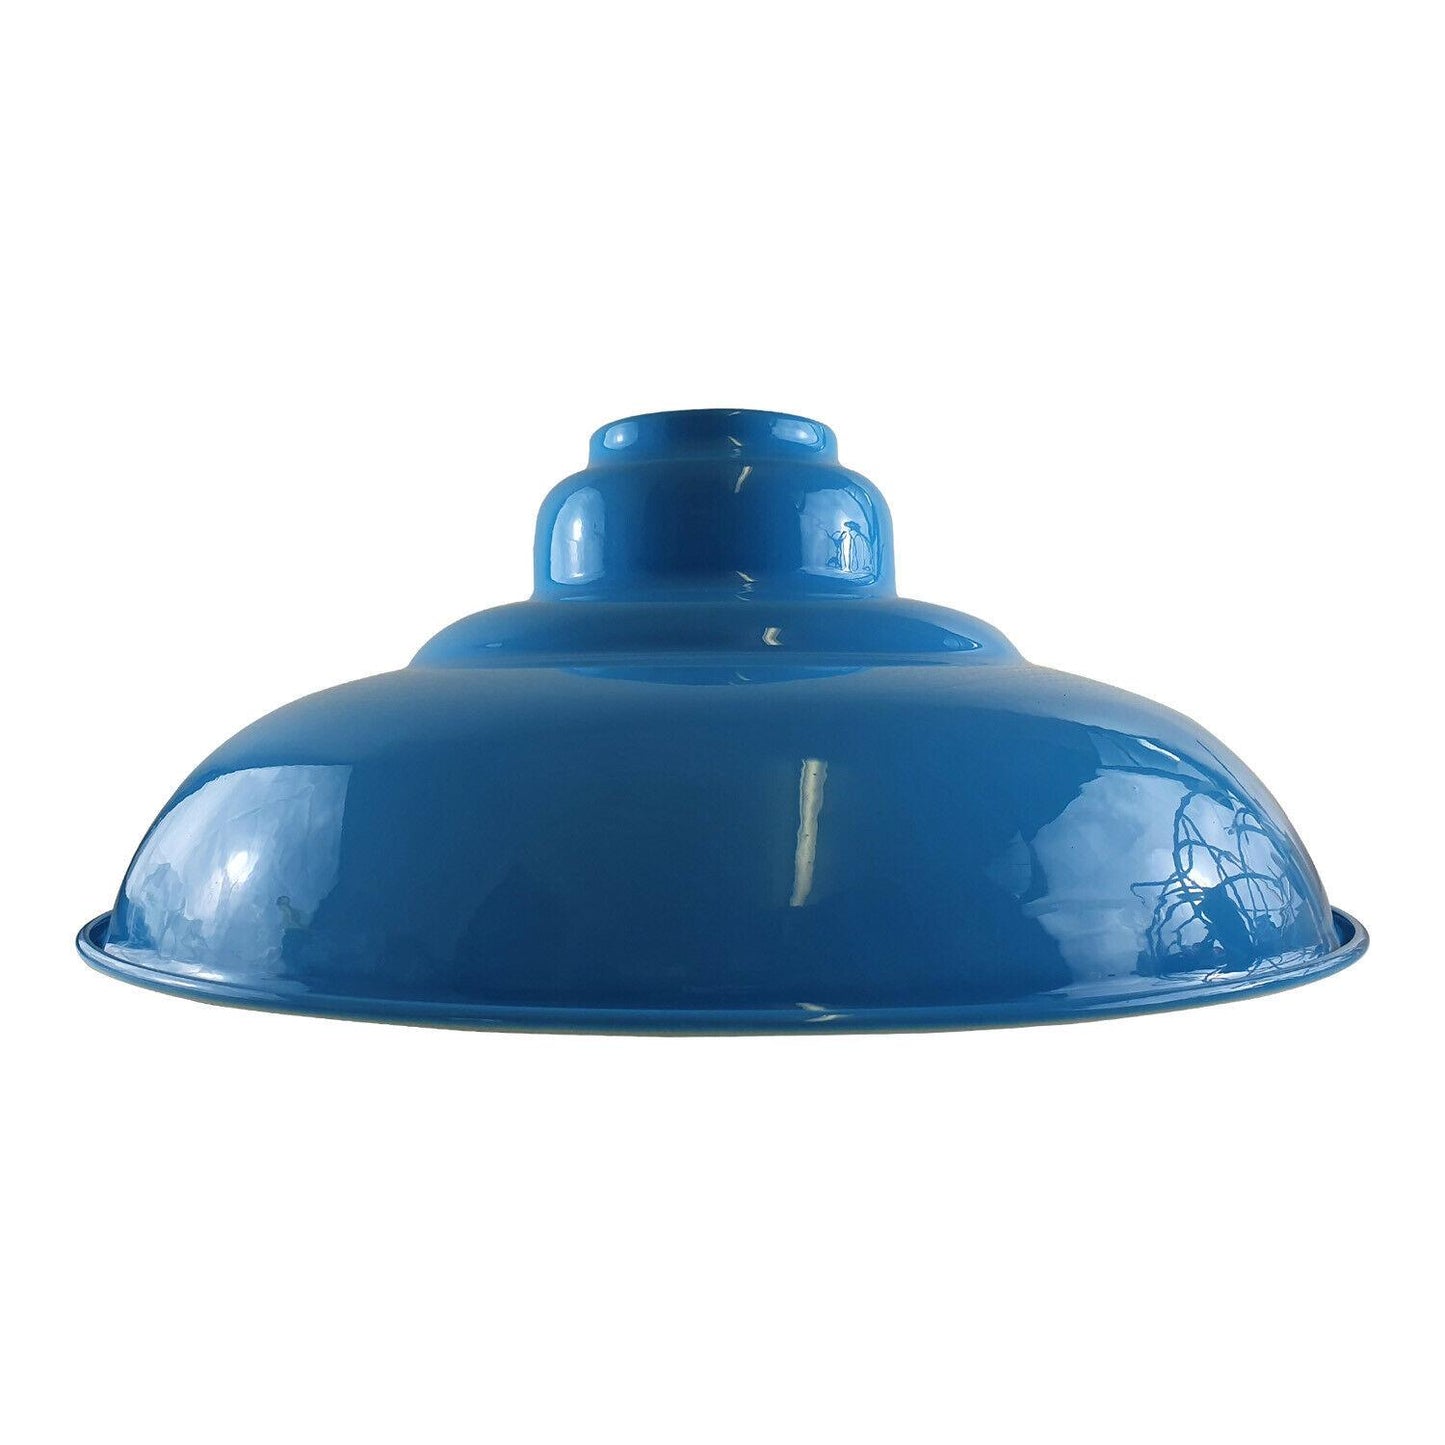 Painted Color Ceiling Pendant Industrial Style Semi Curvy Gloss Modern Metal Indoor Home Light Lampshade